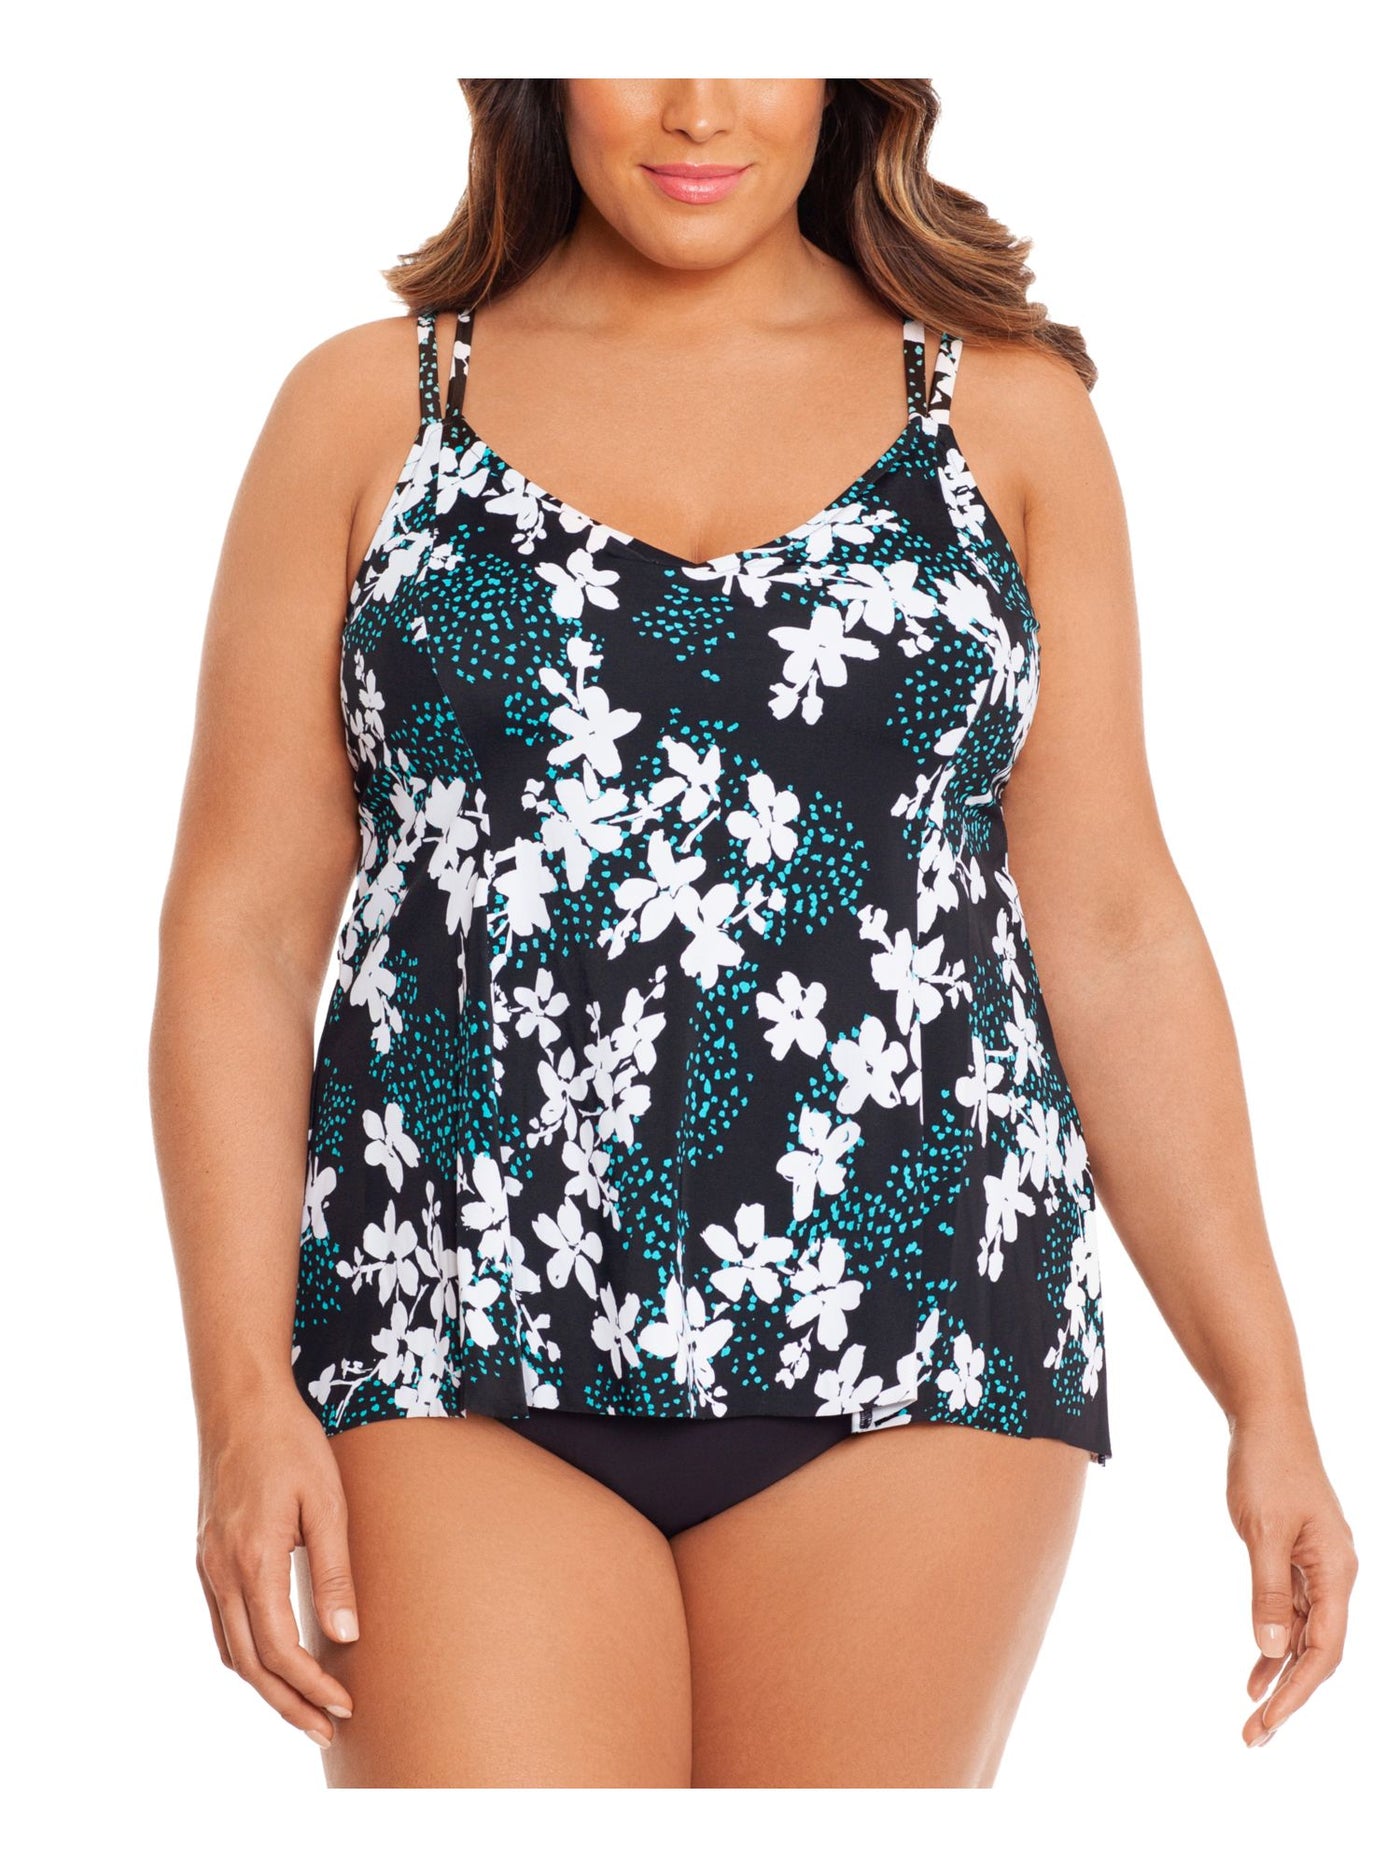 SWIM SOLUTIONS Women's Black Floral Stretch Full Bust Support TUMMY CONTROL Full Coverage Scoop Neck One Piece Swimsuit 26W